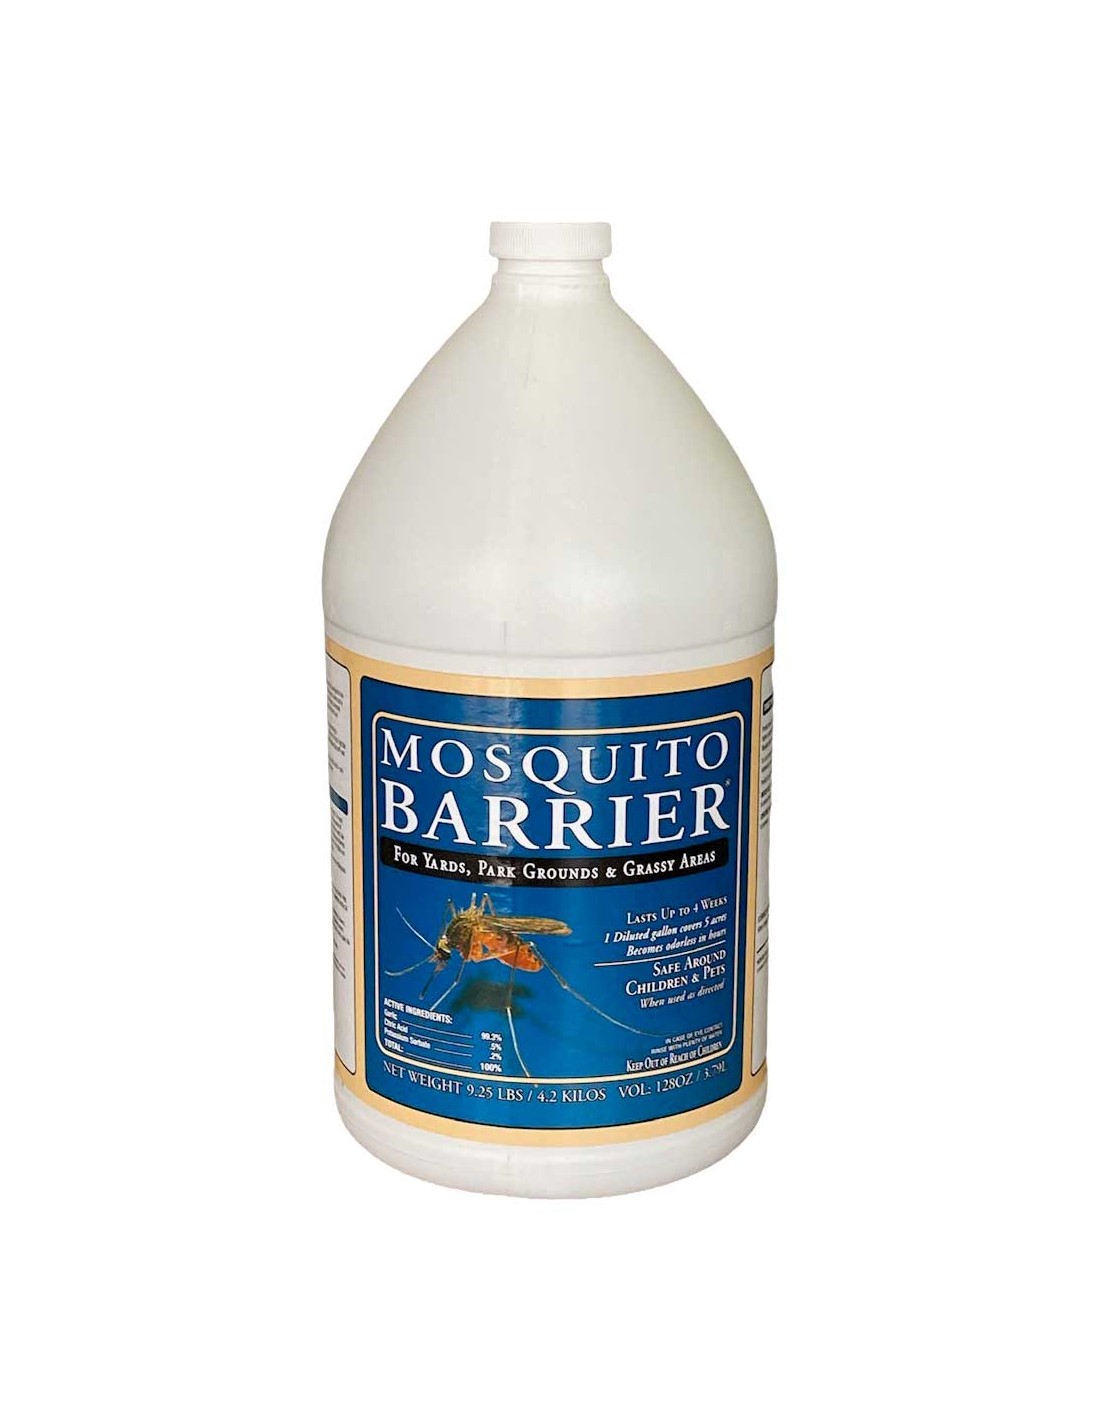 can this product be used in a 2 gal hand  held pump sprayer ?